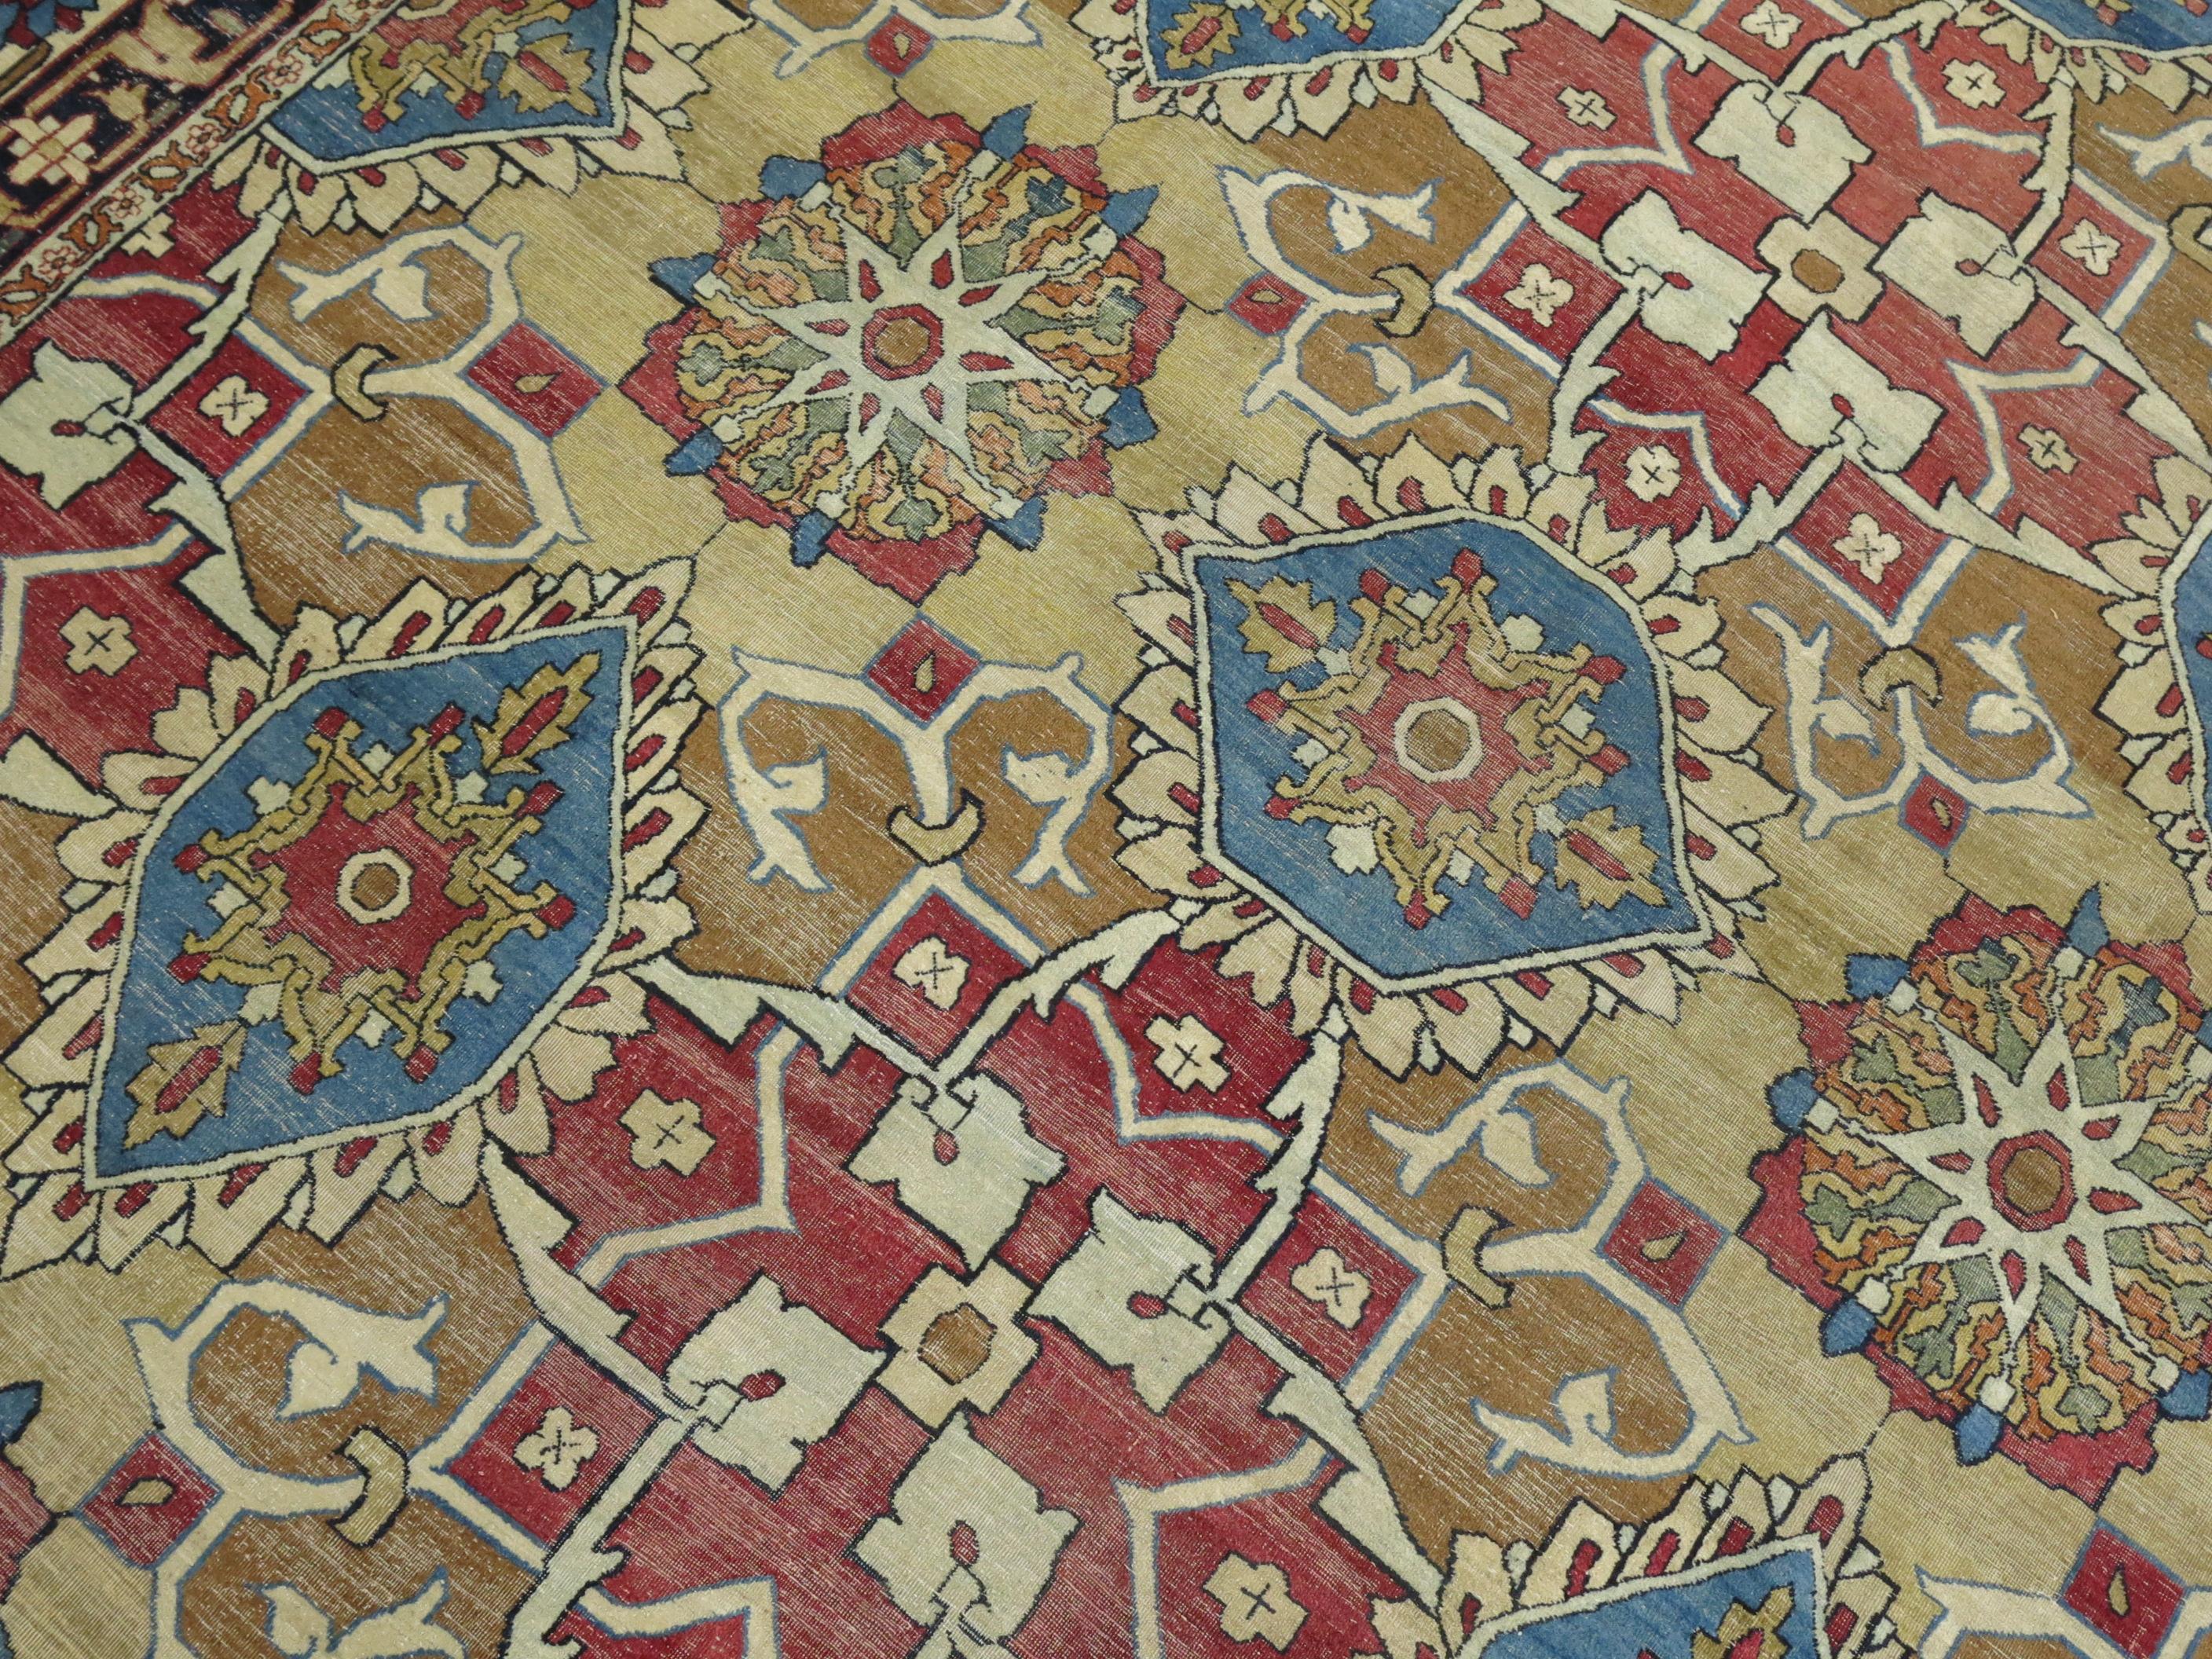 Phenomenal early 20th century Antique Persian Kerman rug.

An Avant Garde field design of reciprocating shield medallions, this exceptional finely woven 19th century Persian laver Kirman carpet pairs venerable creativity with the exquisite